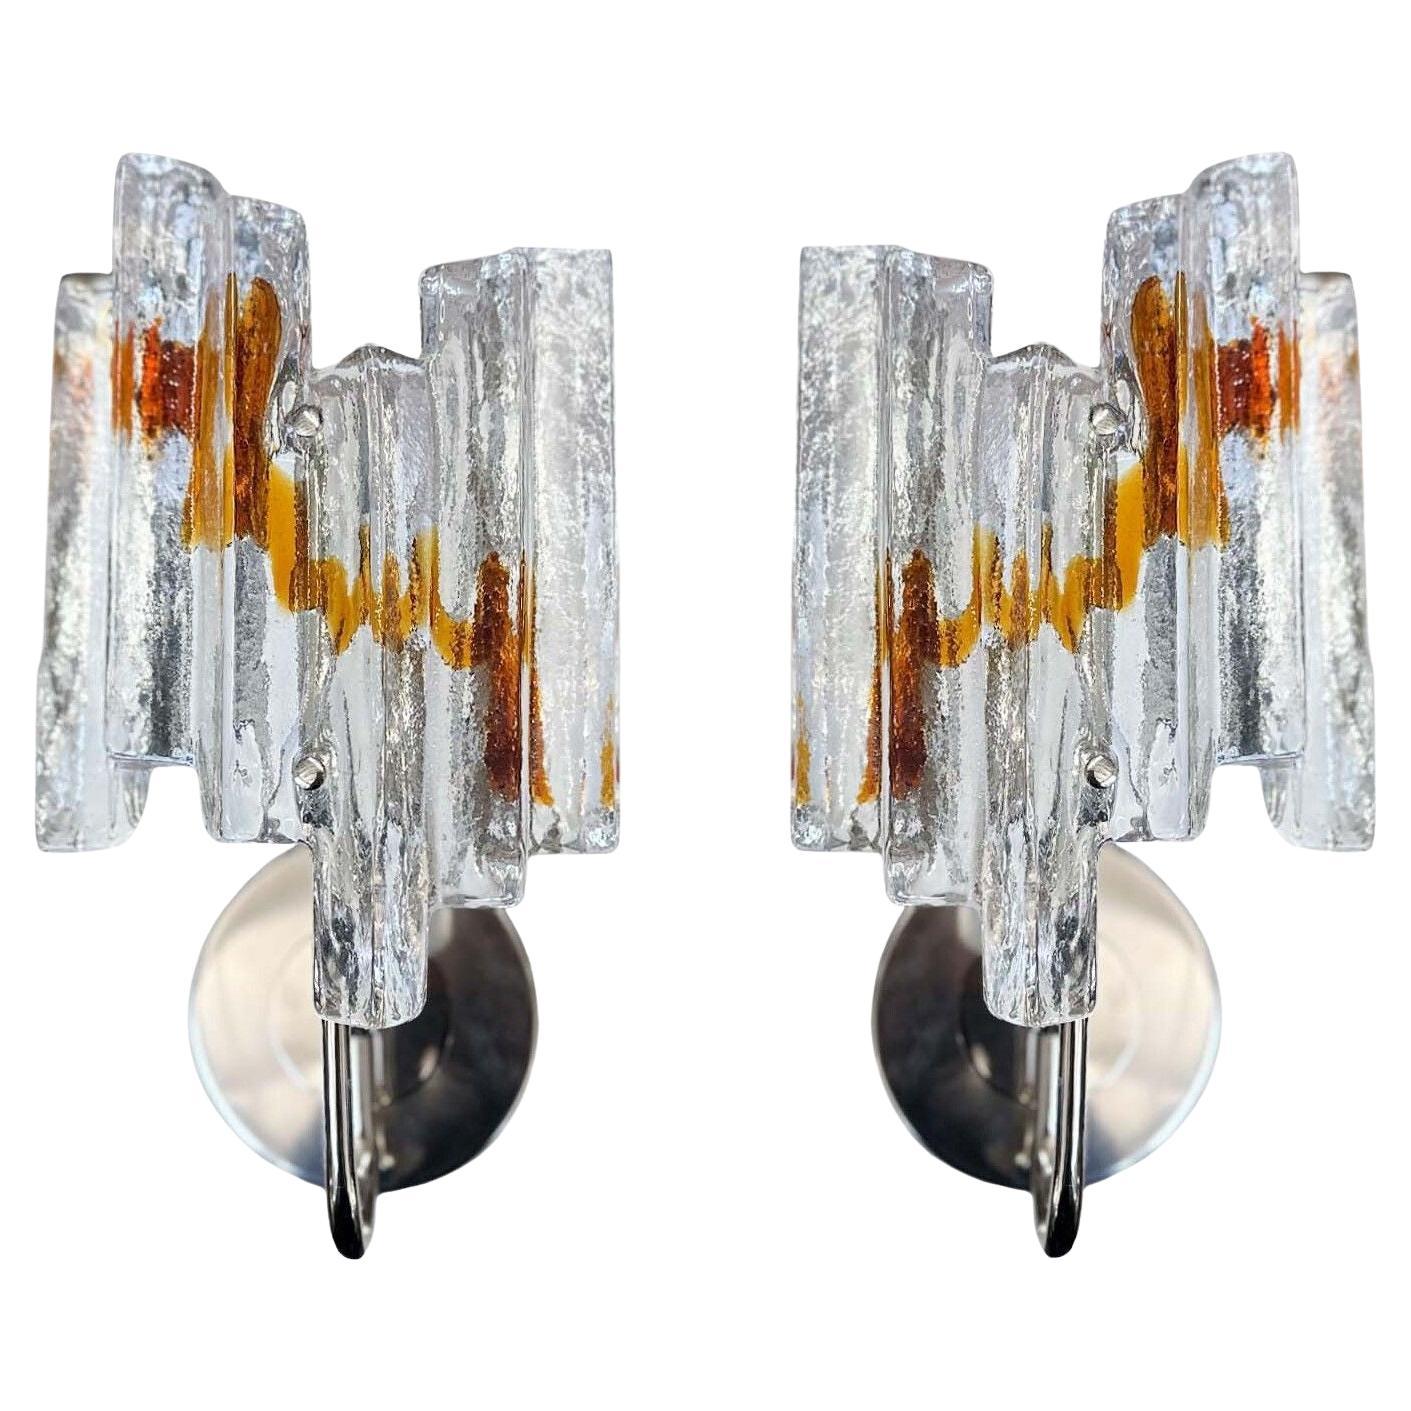 Pair of Clear & Amber Murano Glass Sconces, c. 1960's For Sale